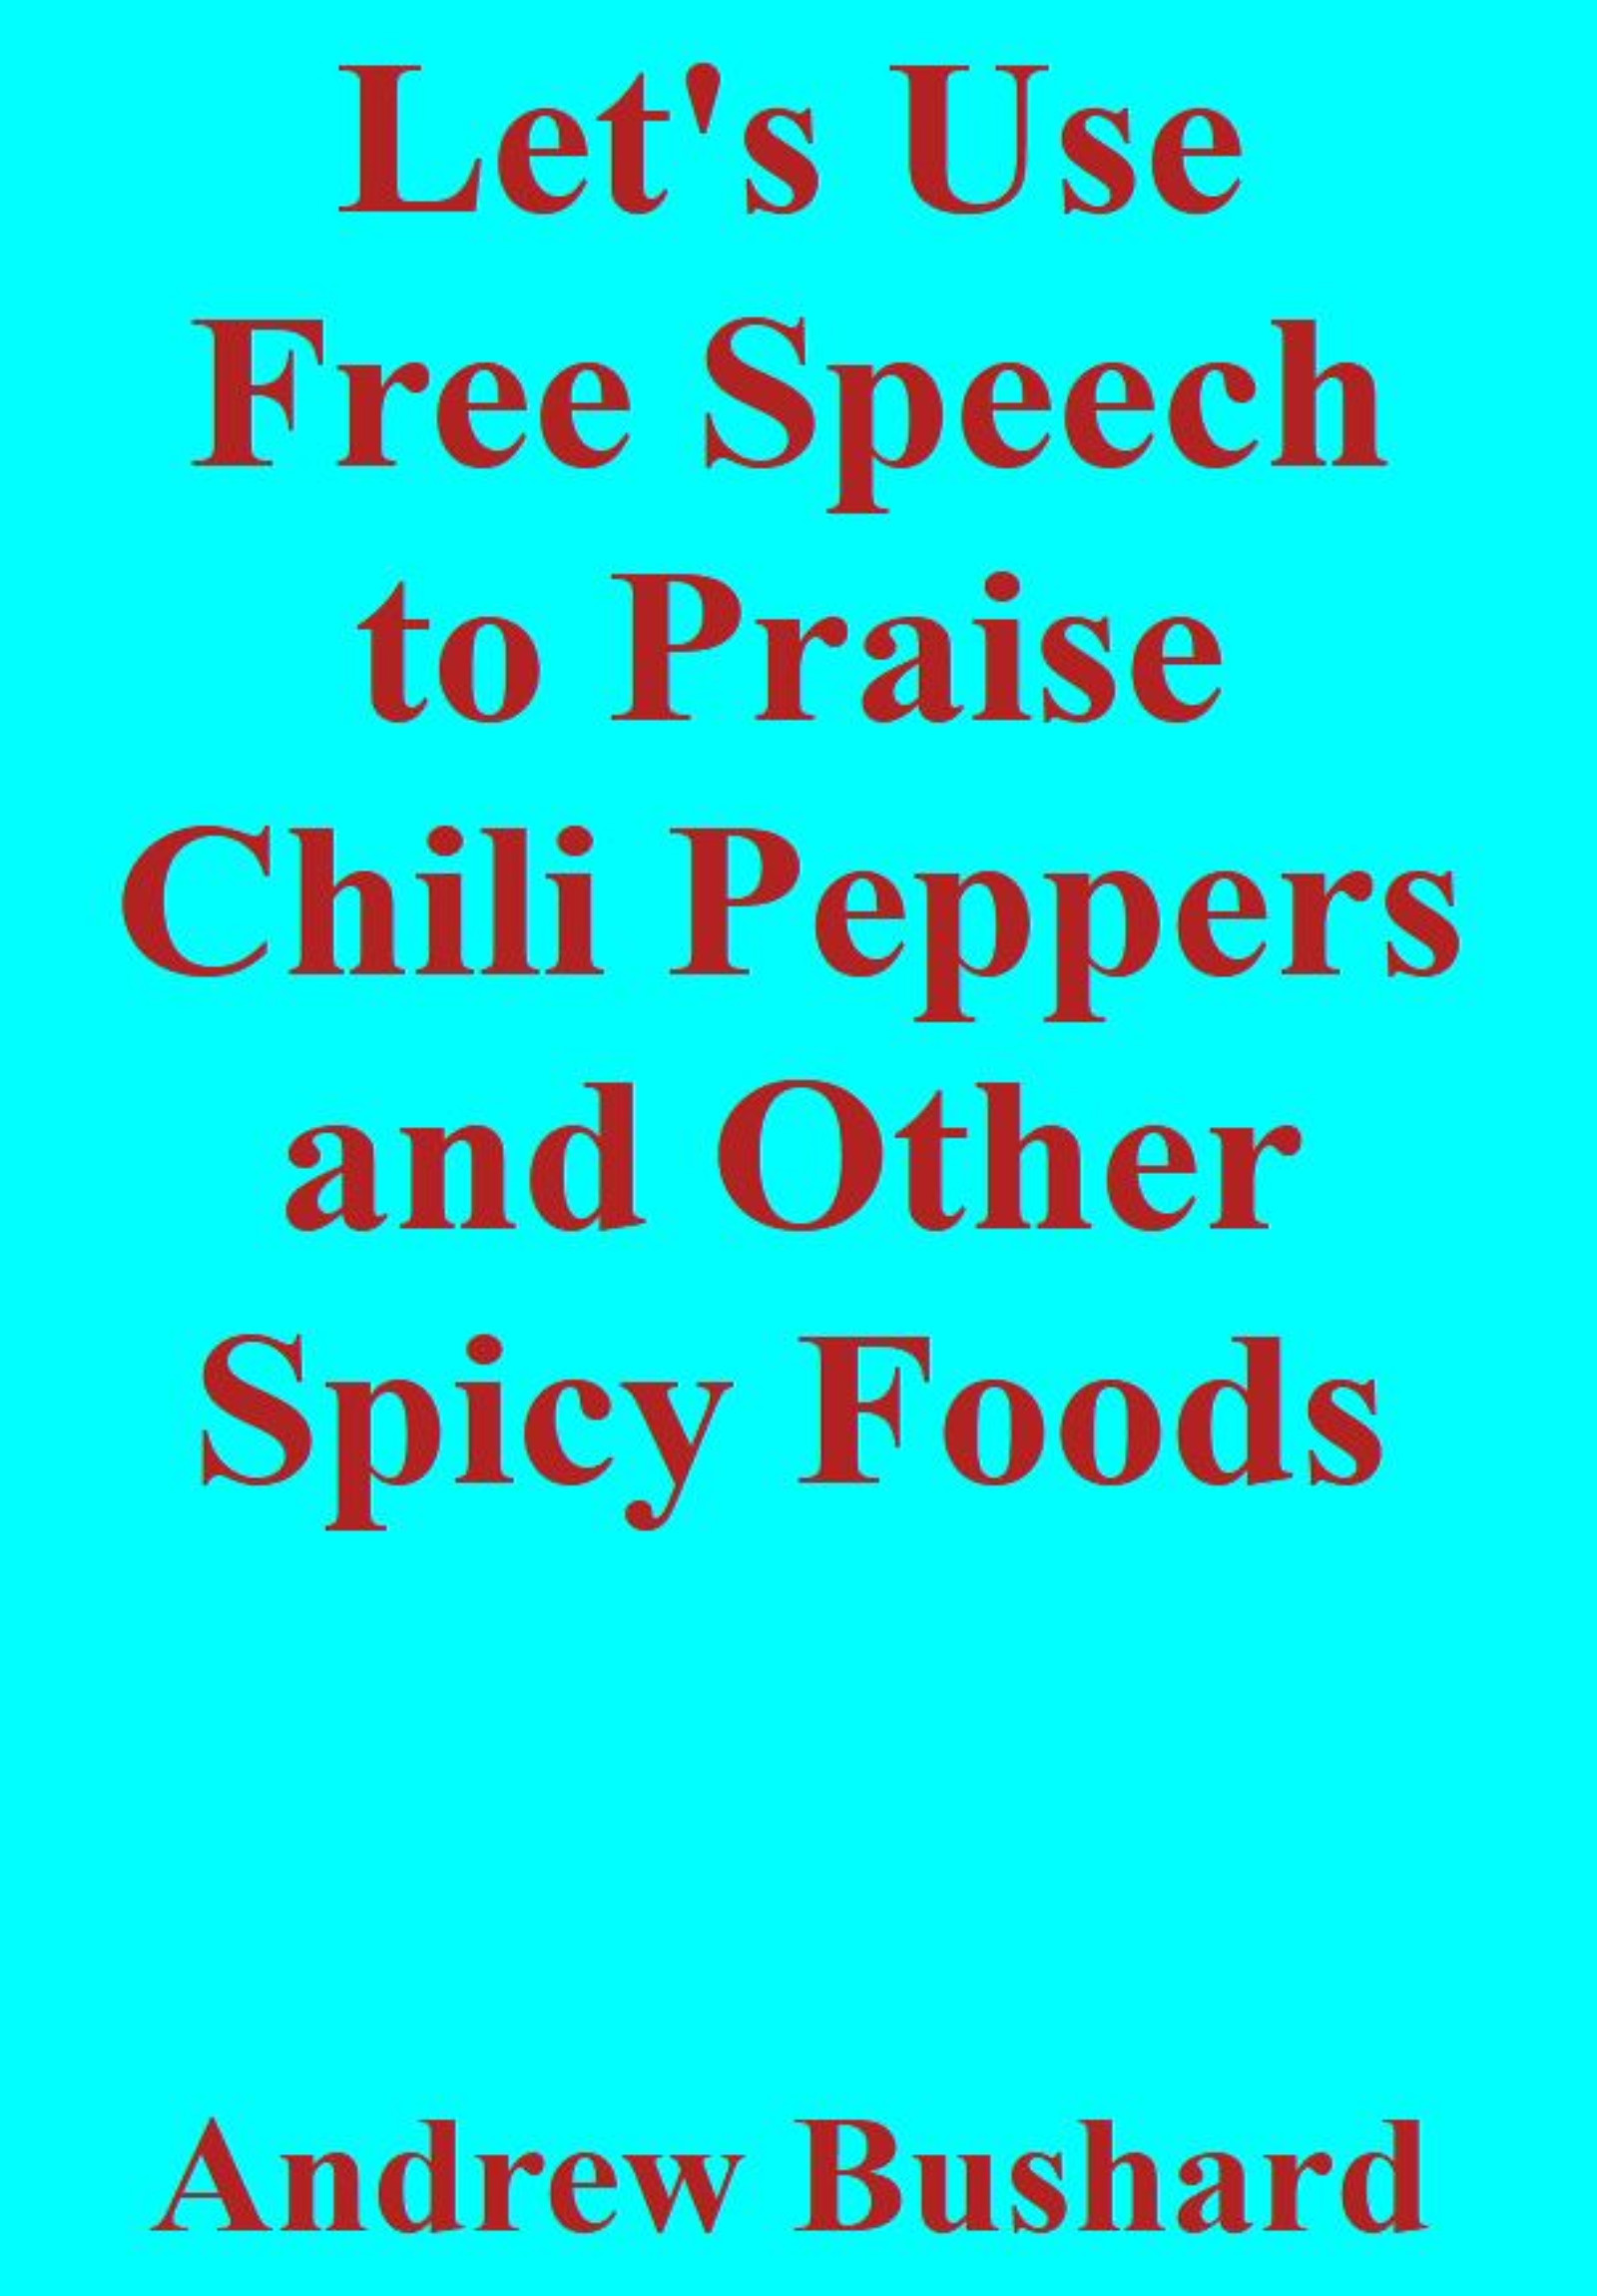 Let's Use Free Speech to Praise Chili Peppers and Other Spicy Foods's featured image